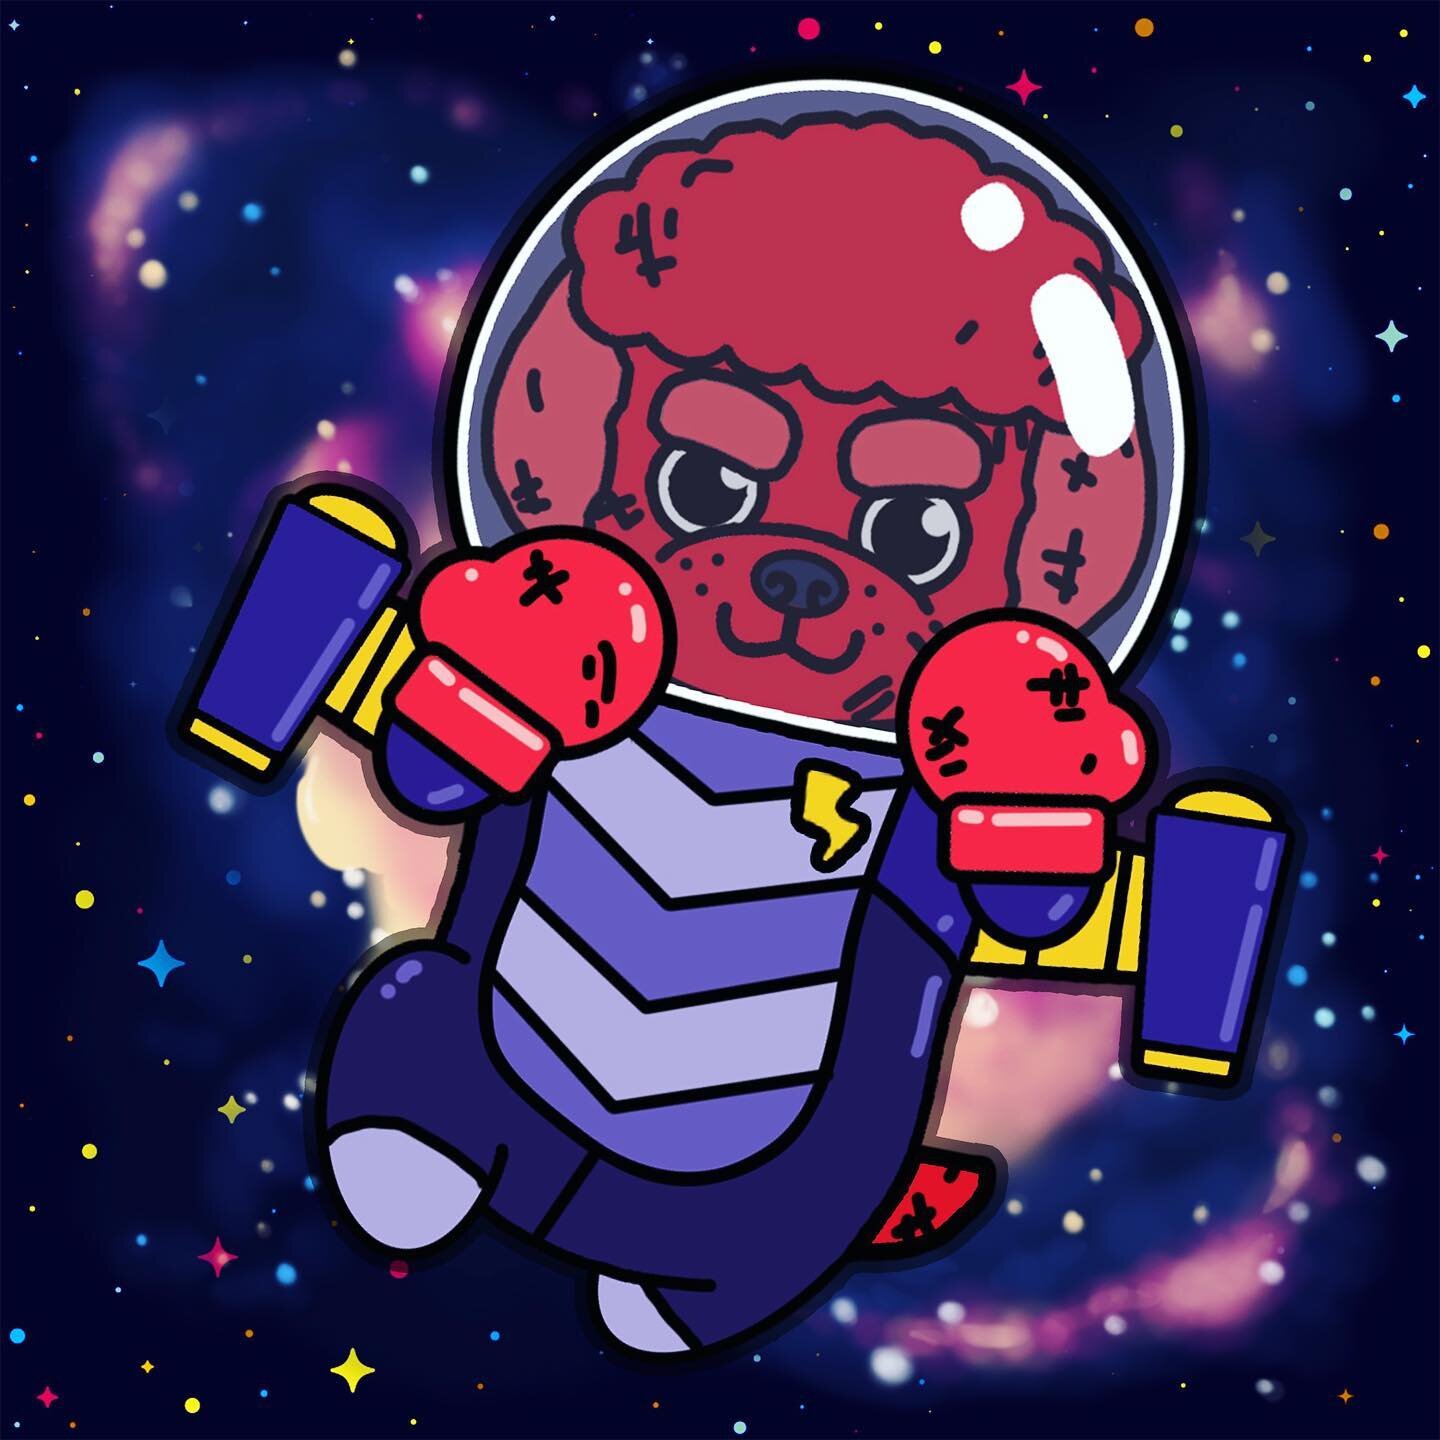 Meet Buster! He&rsquo;s here to tell you that a new patch of Beyond Repair is now available! Update to try the new version

#beyondrepairgame #gameplay #puzzlegame #iosgame #madewithunity #patch #update #spacegame #game #space #scifi #dog #cute #whol